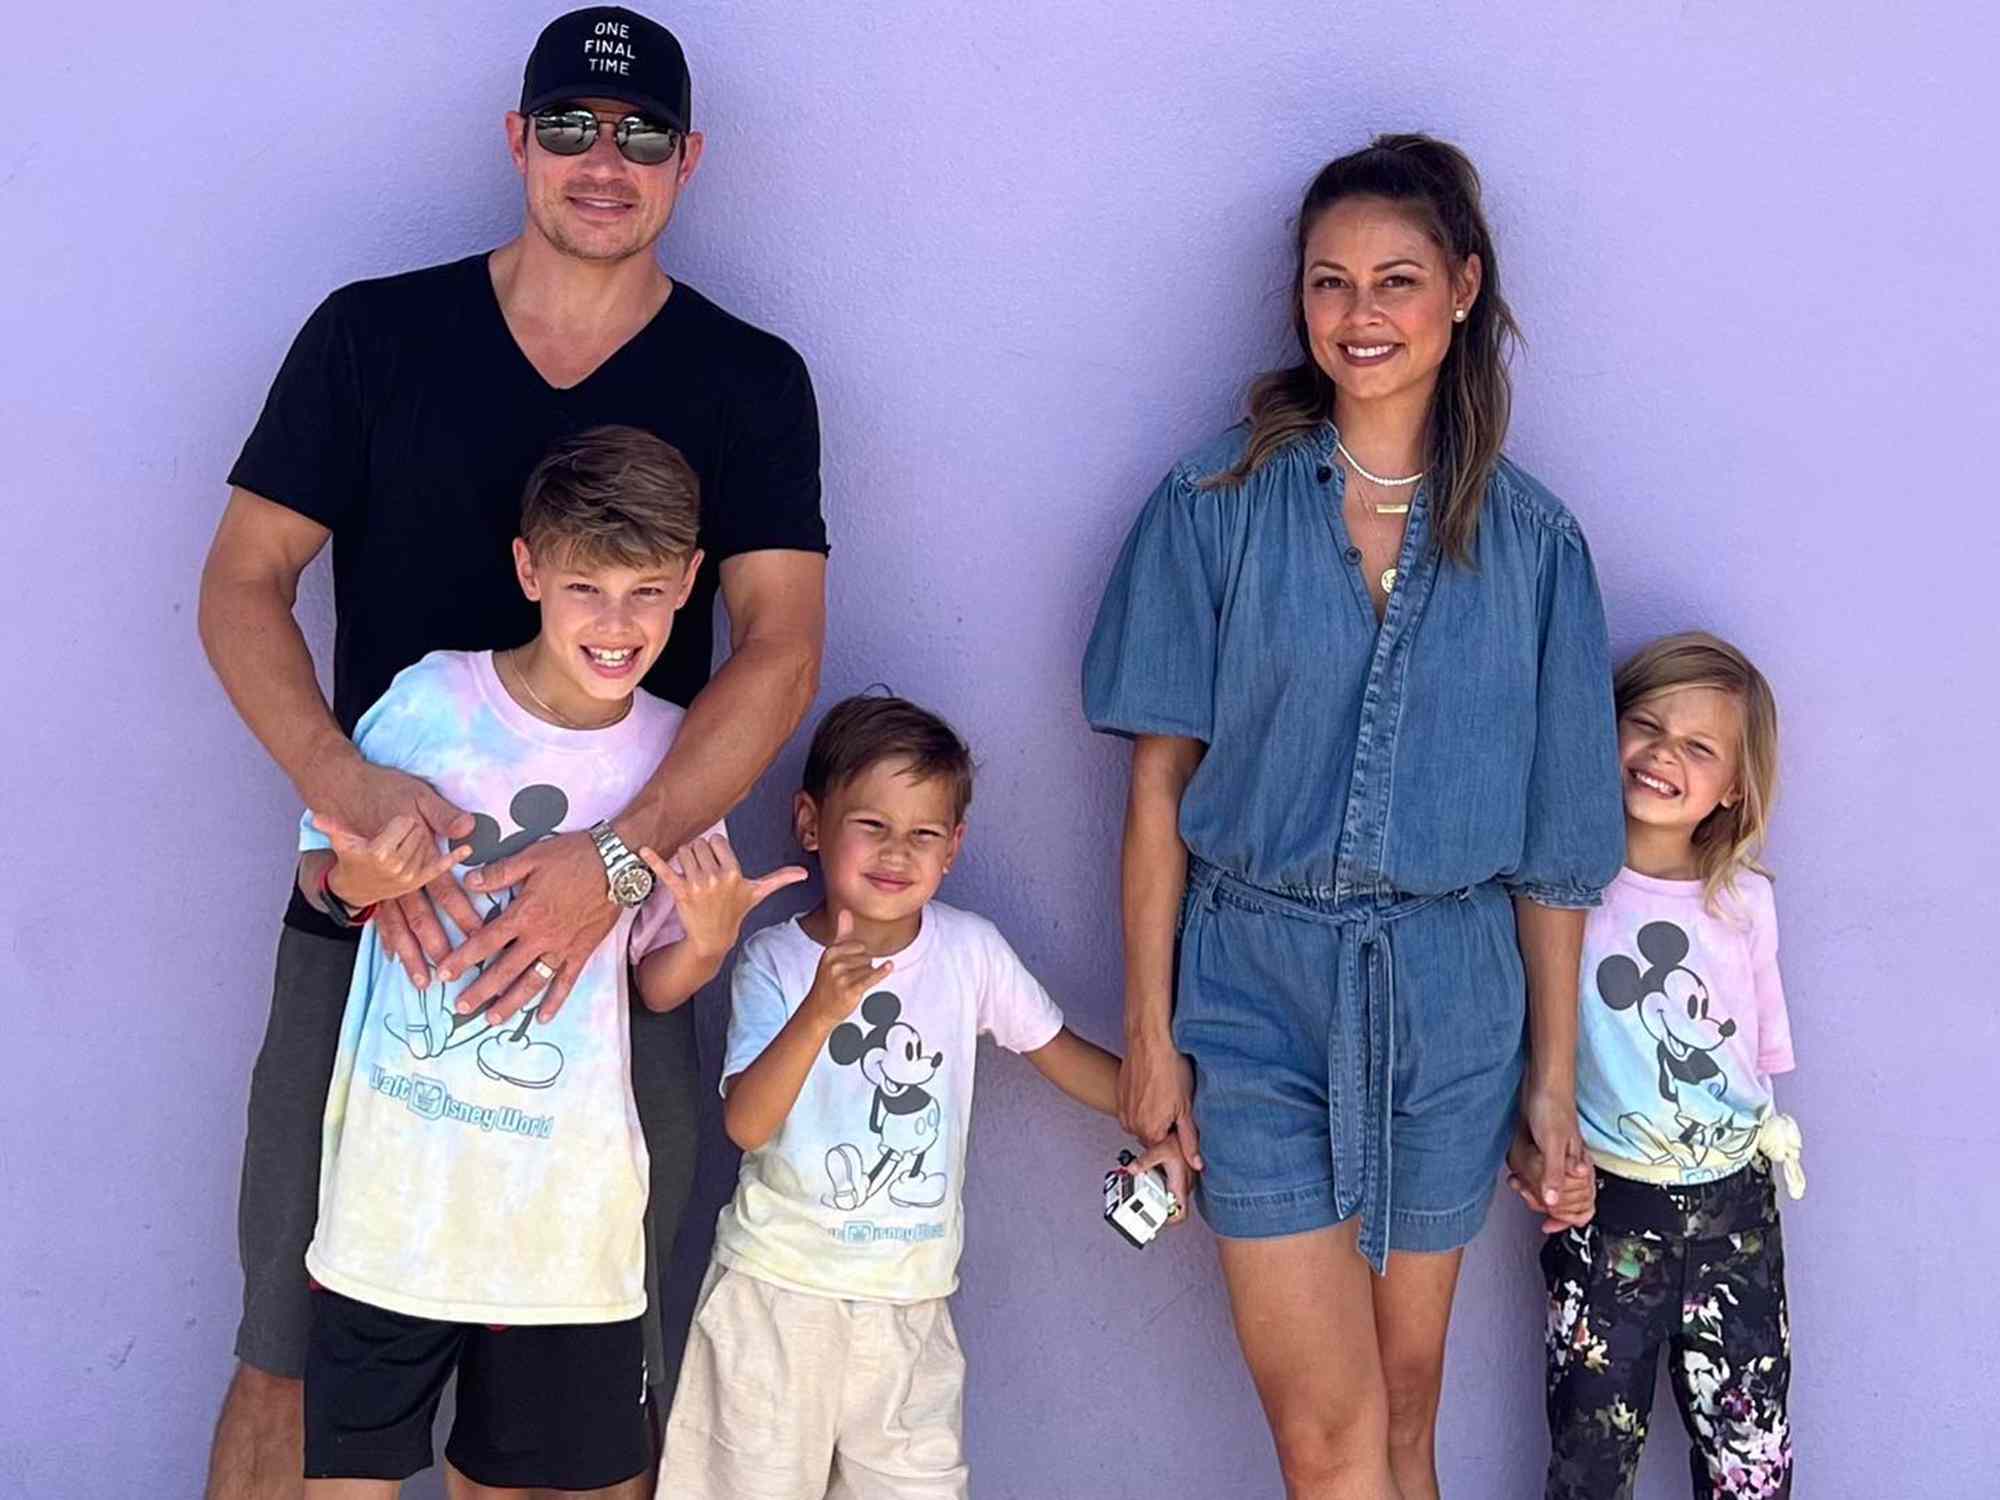 Nick Lachey Celebrates Wife Vanessa on Mother's Day: 'We All Love You Beyond Words'